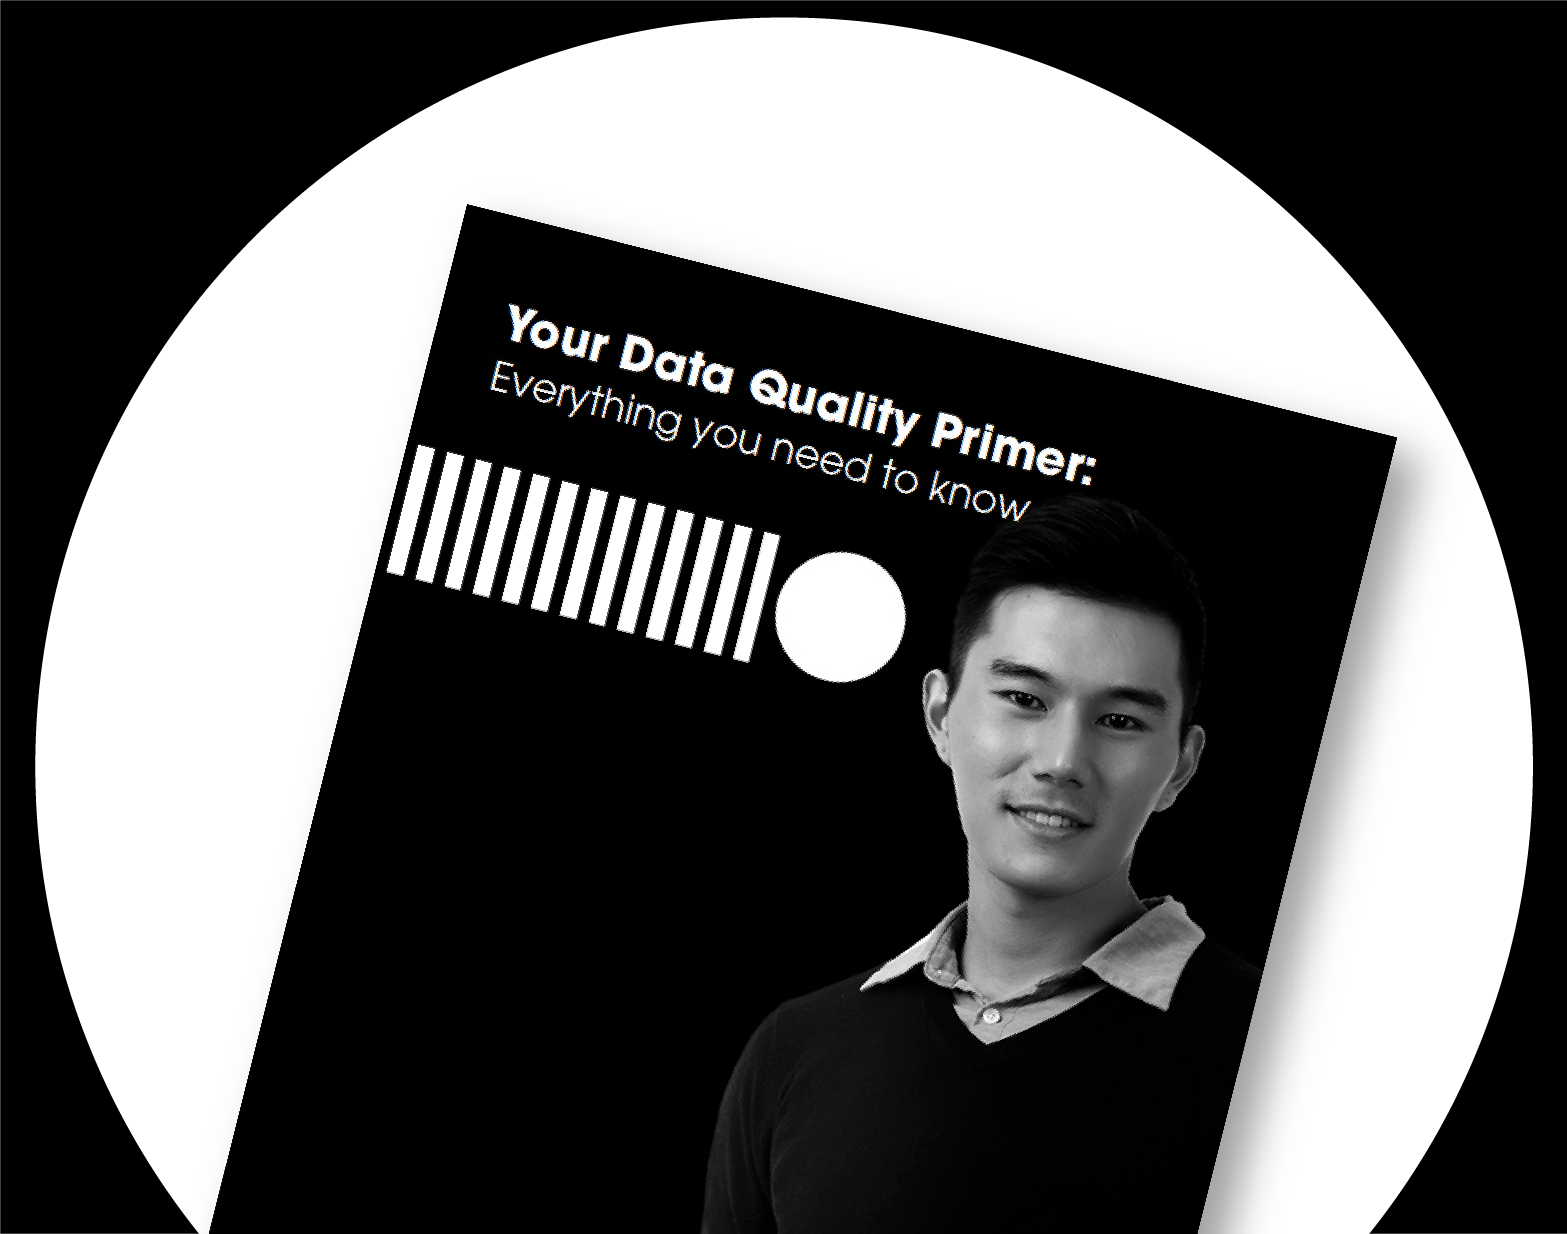 Data Quality Primer: Everything You Need to Know